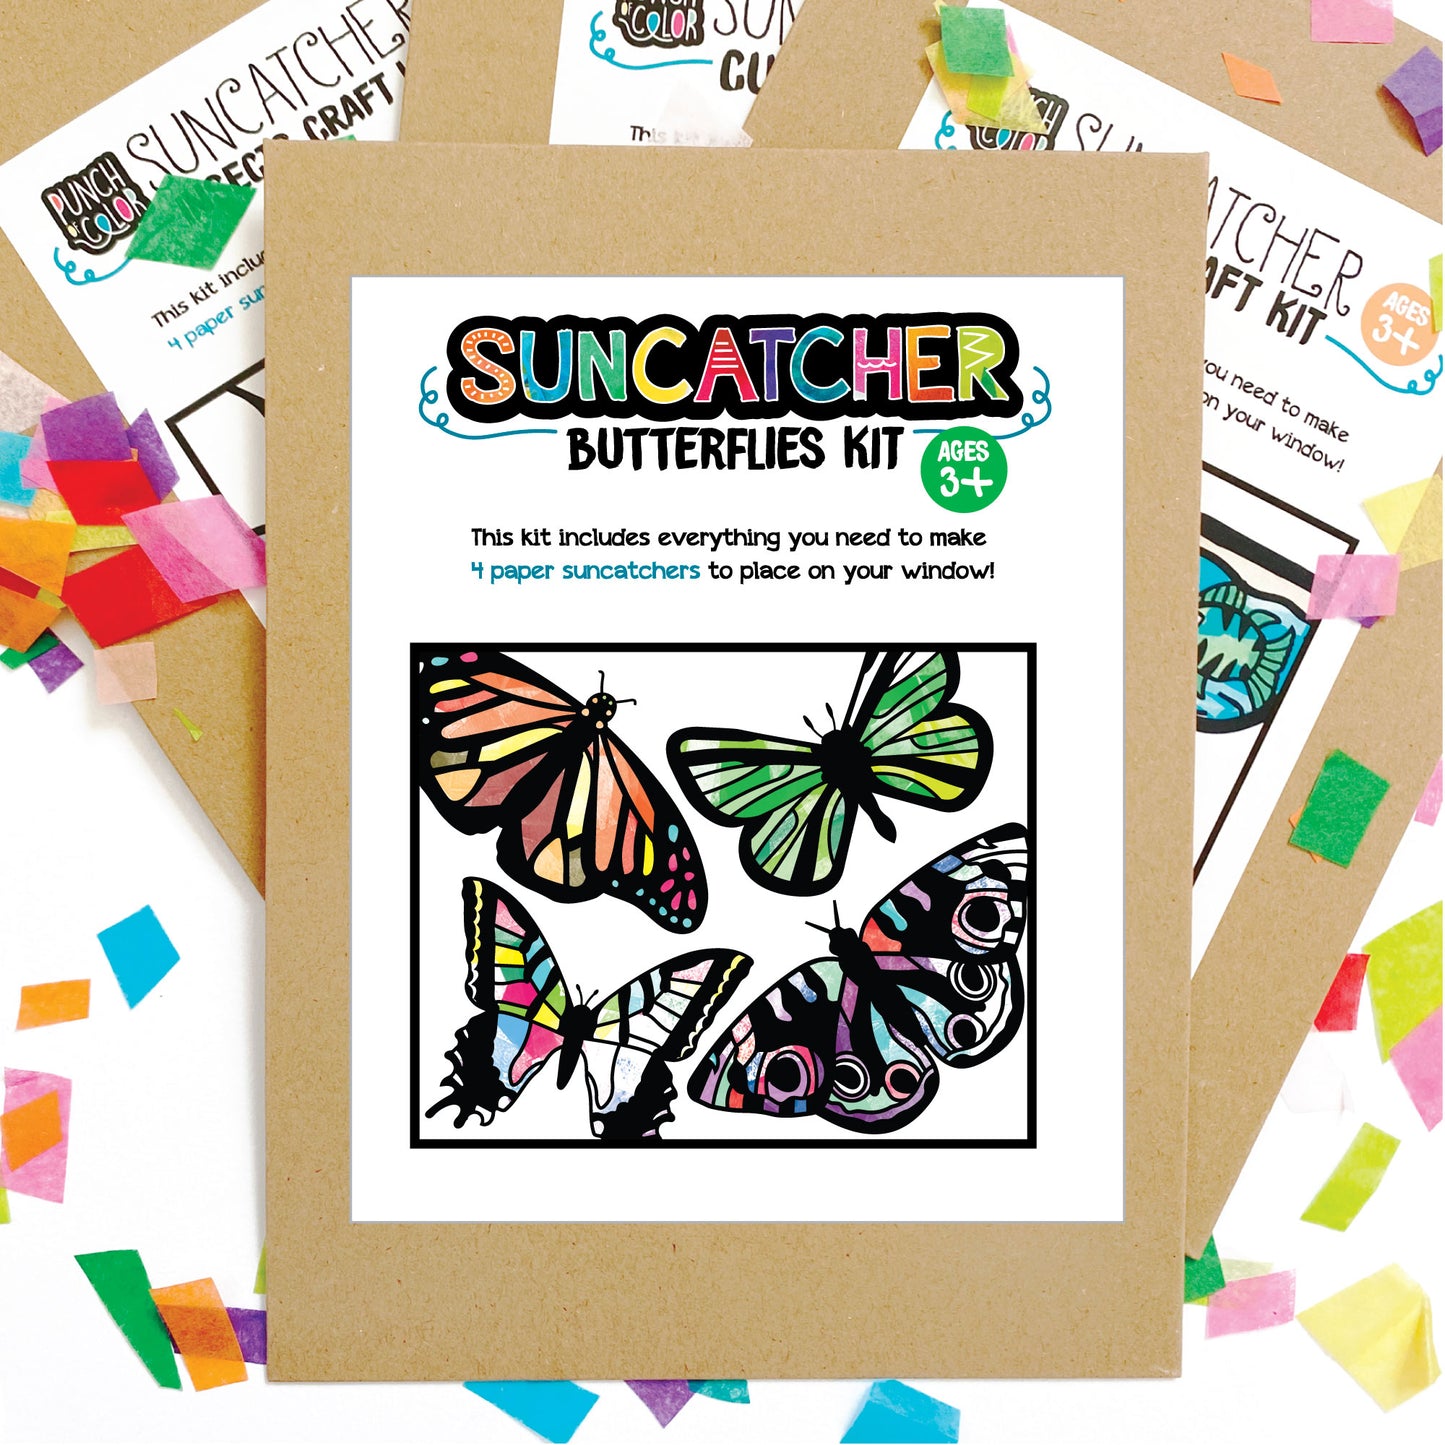 Butterflies suncatcher arts and crafts kit, a mess-free paper based activity for toddlers and kids.